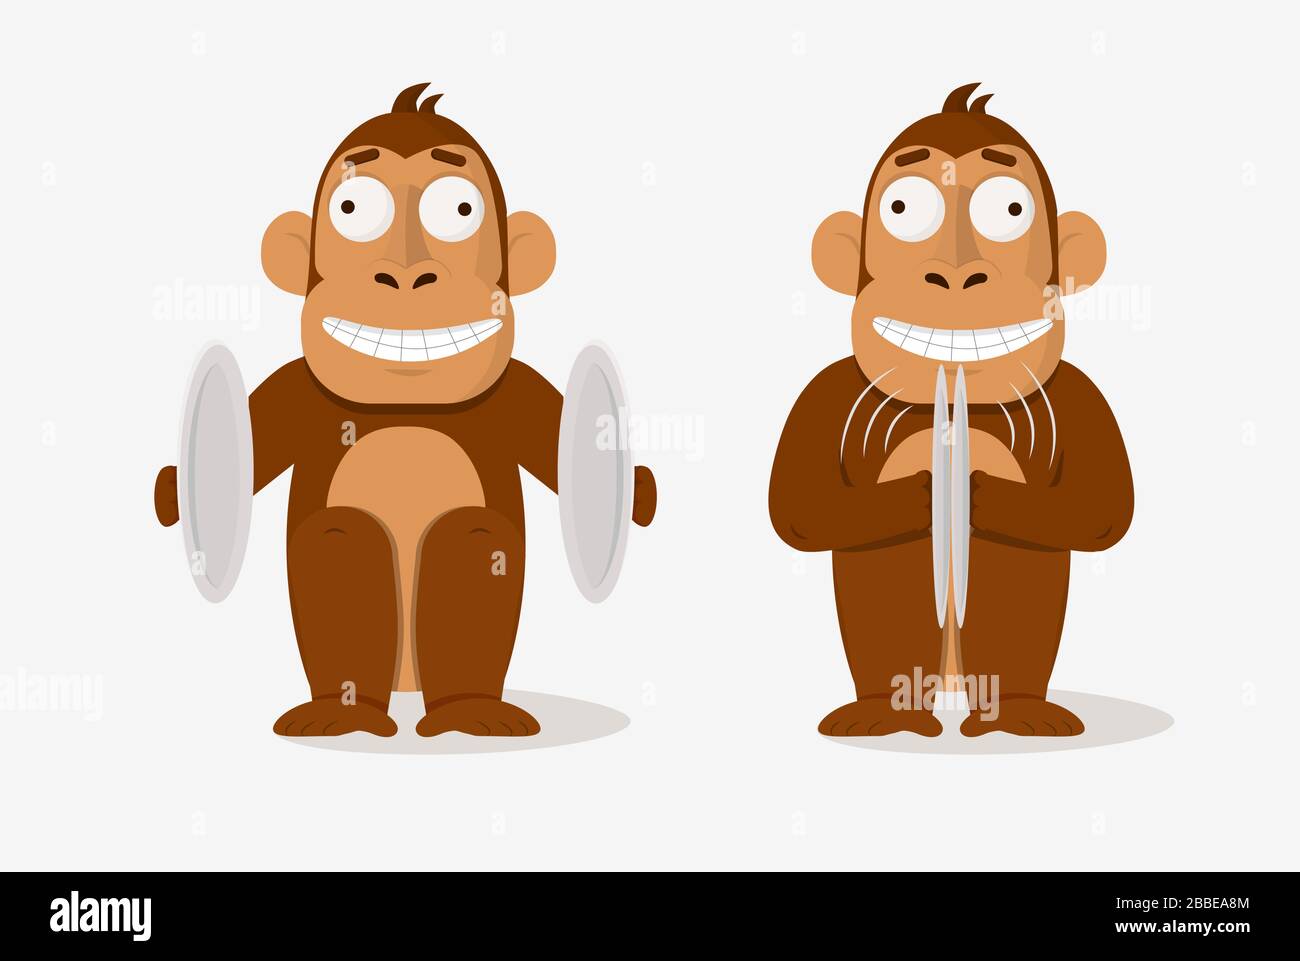 Two cartoon crazy smile monkey playing banding cymbals vector graphic illustration Stock Vector